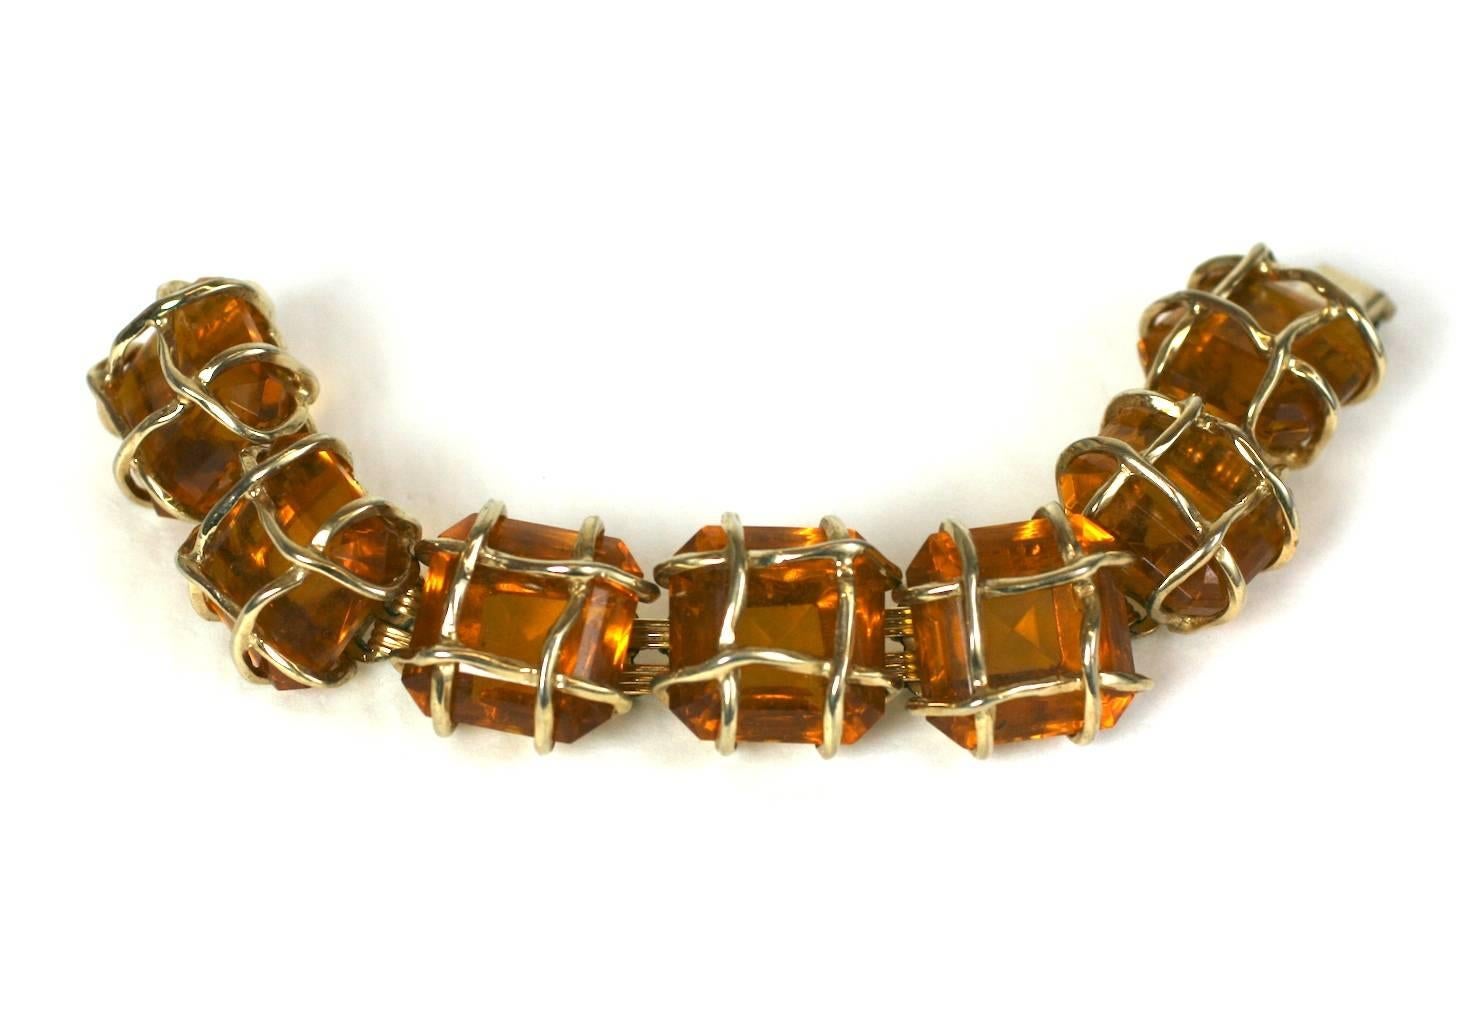 Ledo Caged Topaz Link Bracelet in the Verdura style from the 1950's.  Lido caged faux topaz link bracelet of gilt metal irregular cages inclosing the faceted rectangular stones. Excellent Condition 

Excellent condition. 1950's USA. 